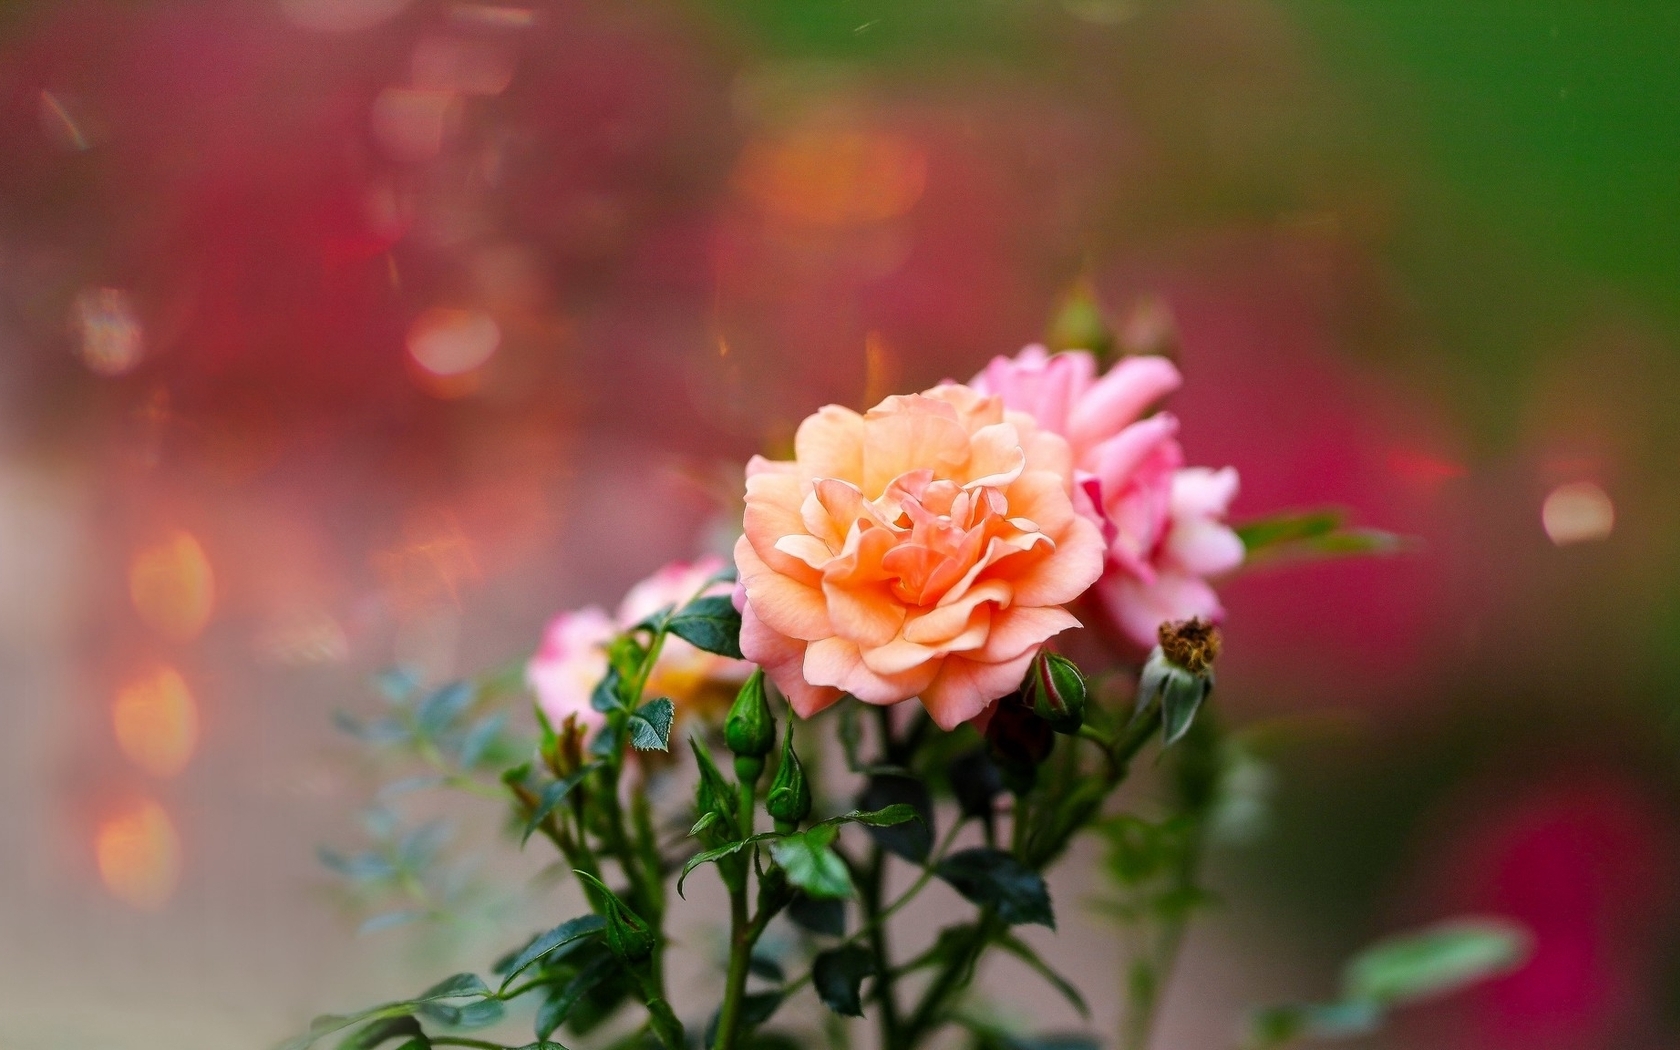 Image: Roses, flowers, beautiful, blurred background